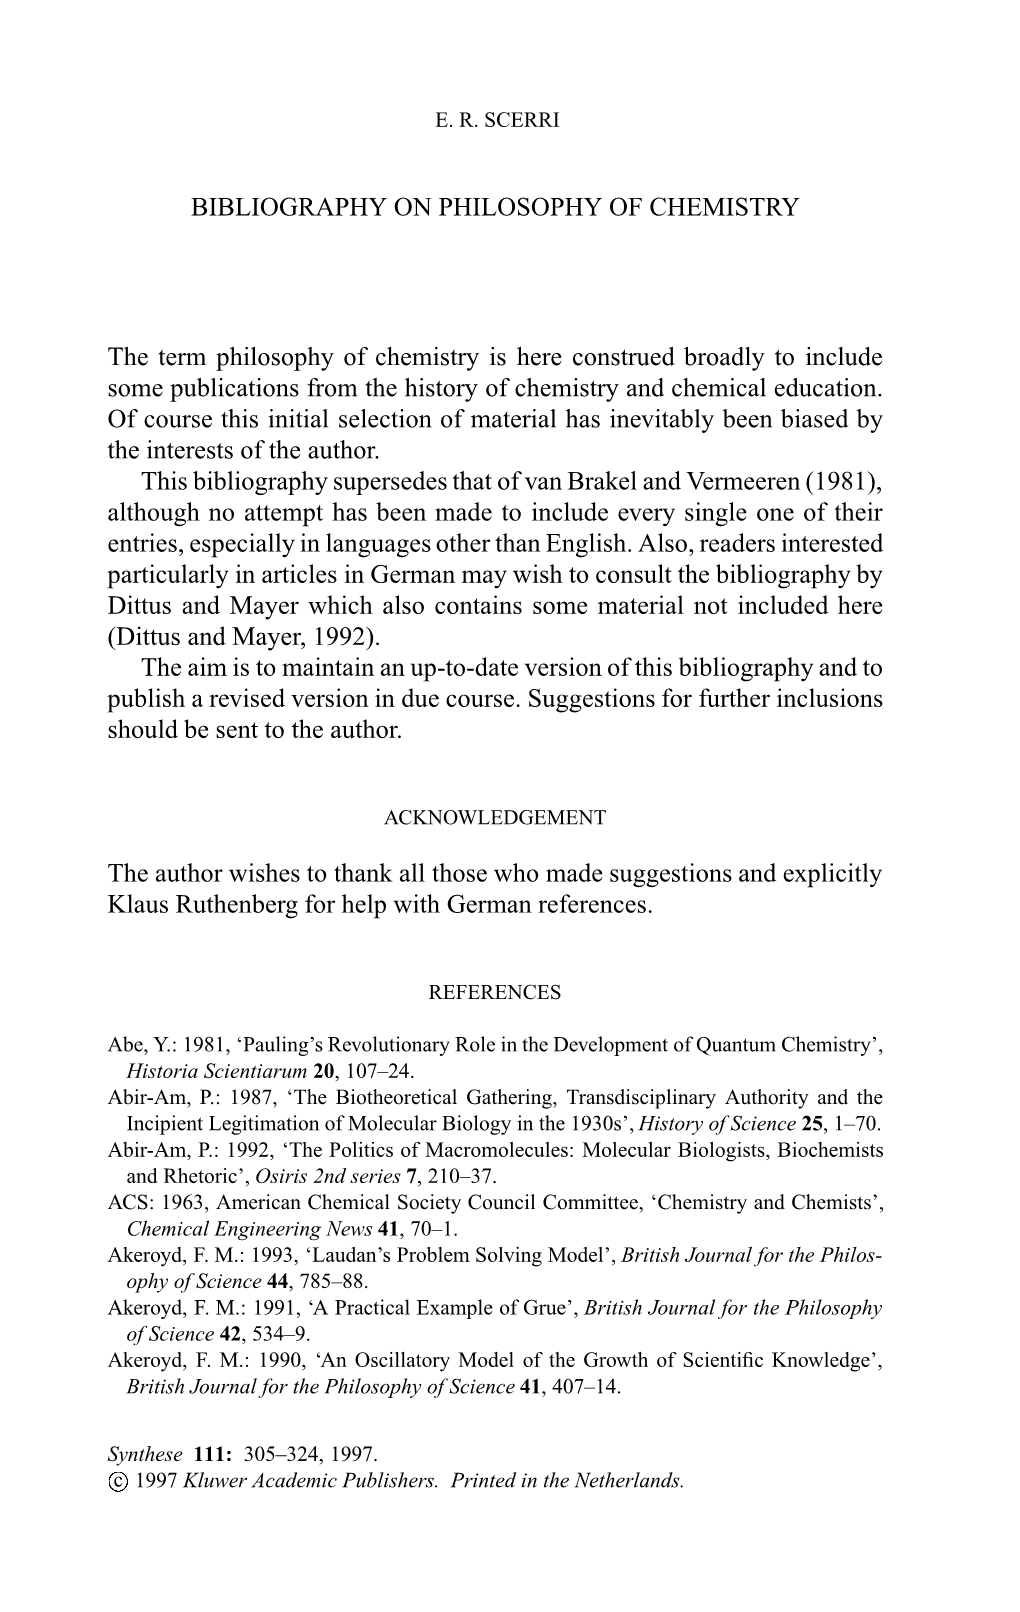 Bibliography on Philosophy of Chemistry